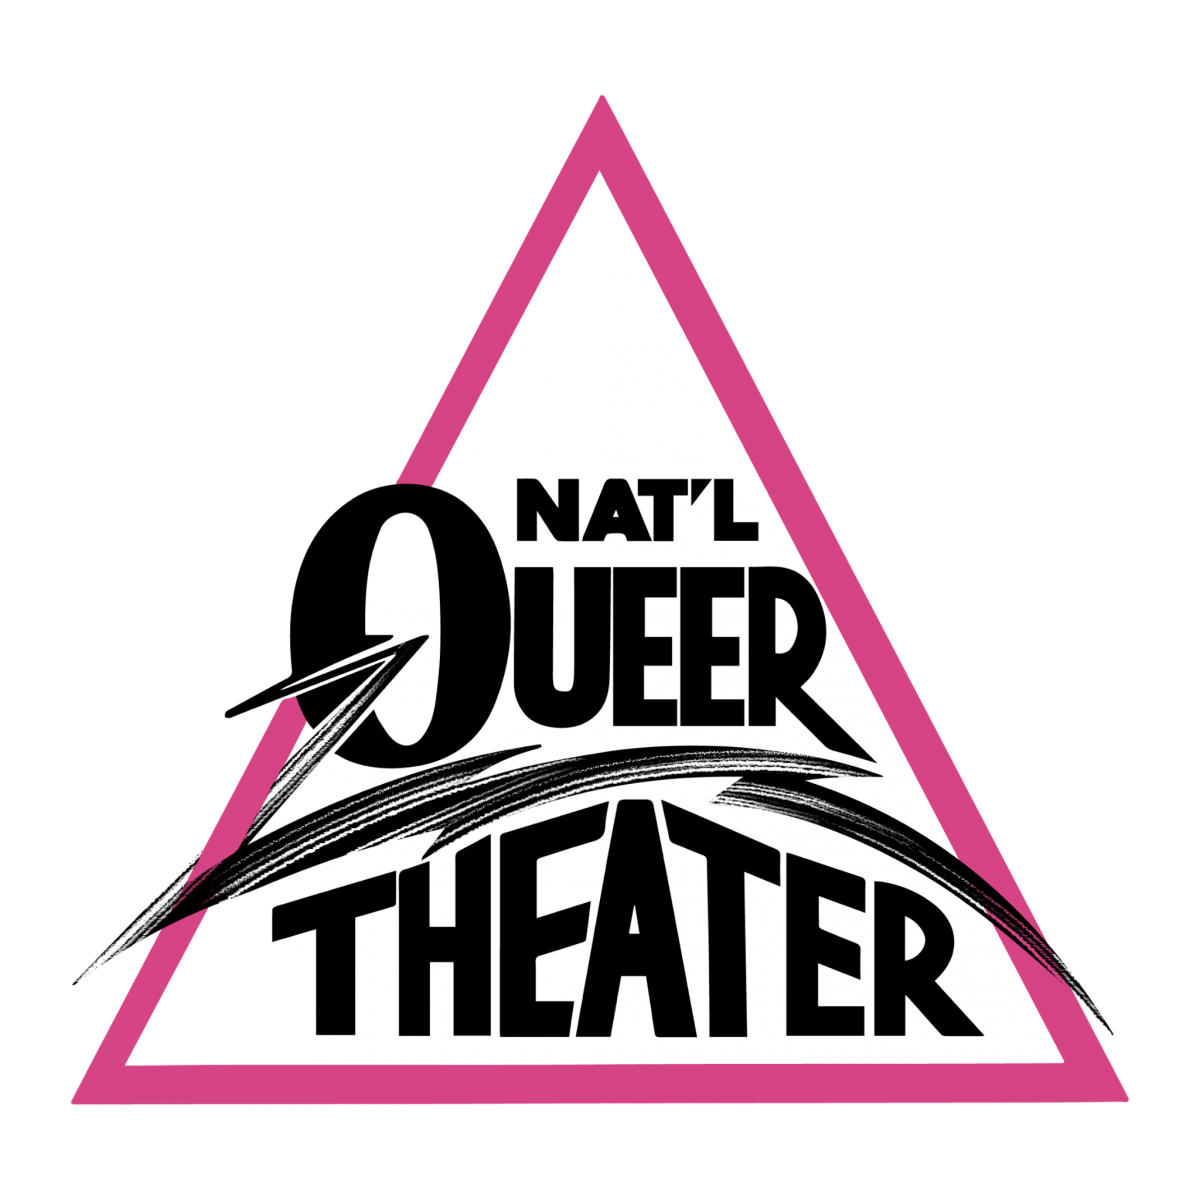 national-queer-theater.png